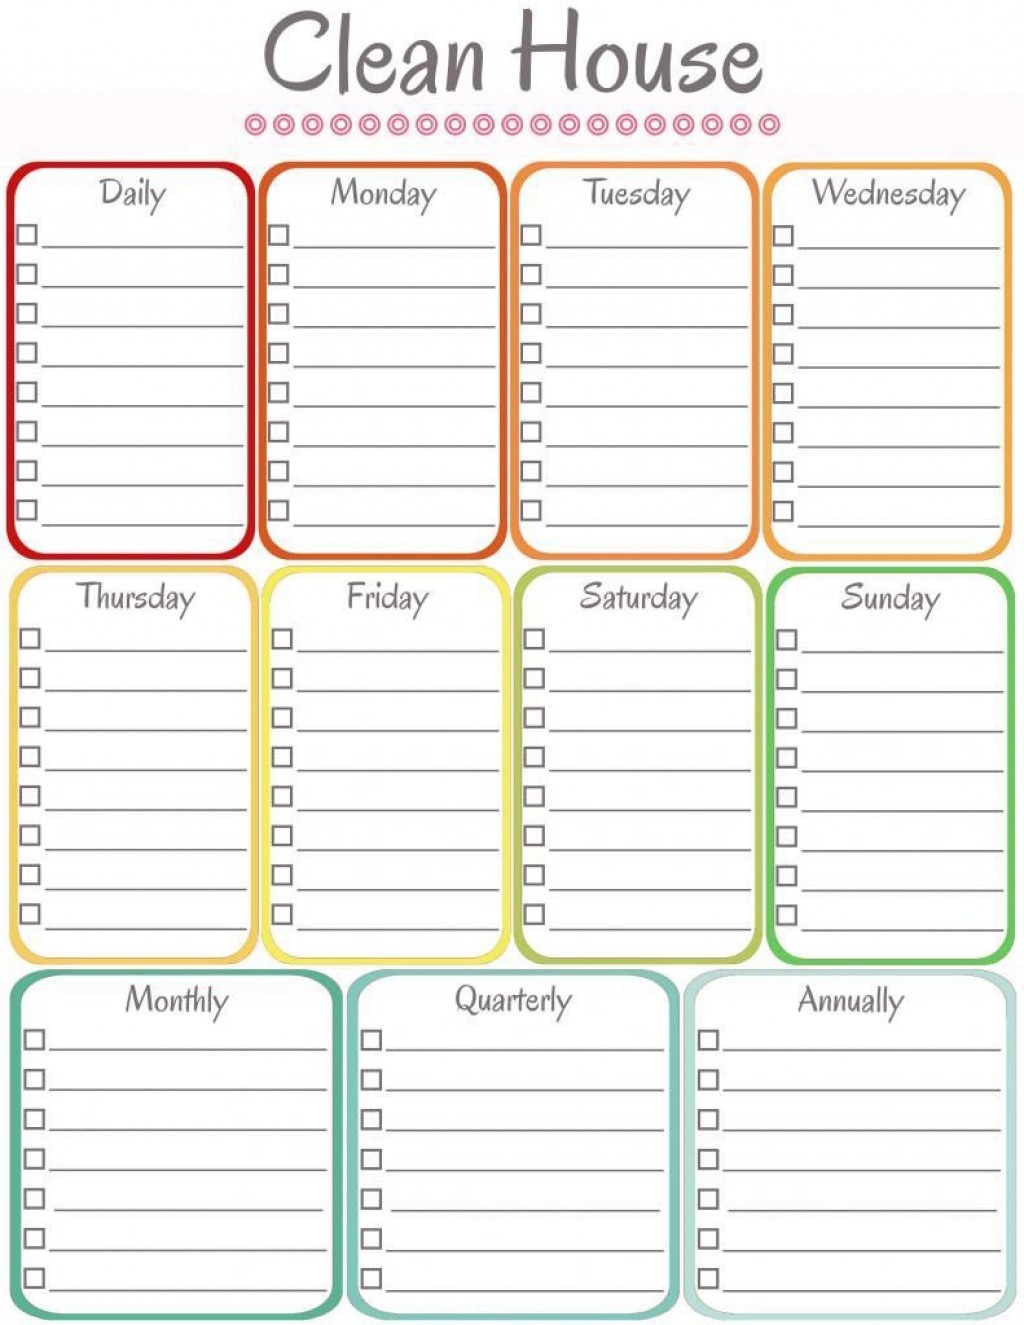 example of weekly cleaning schedule template